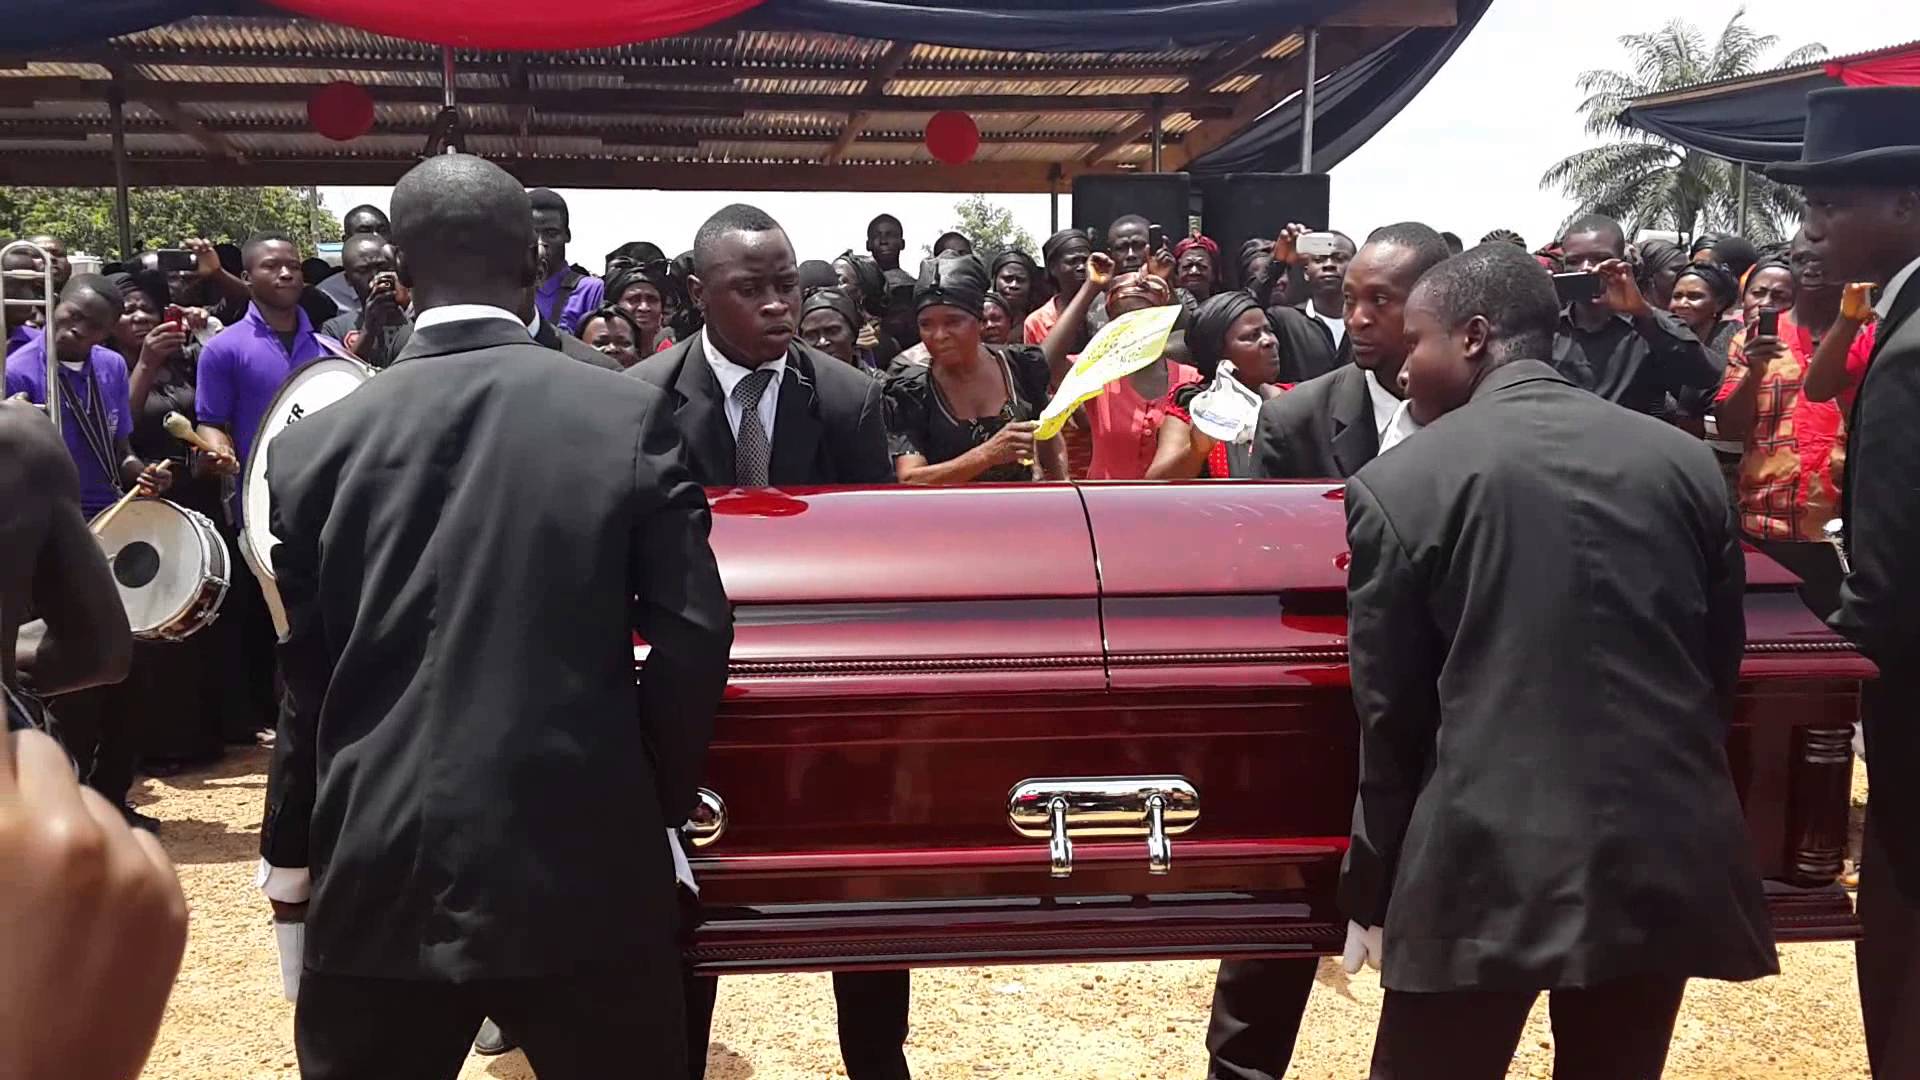 Dancing pallbearers have become common at funerals